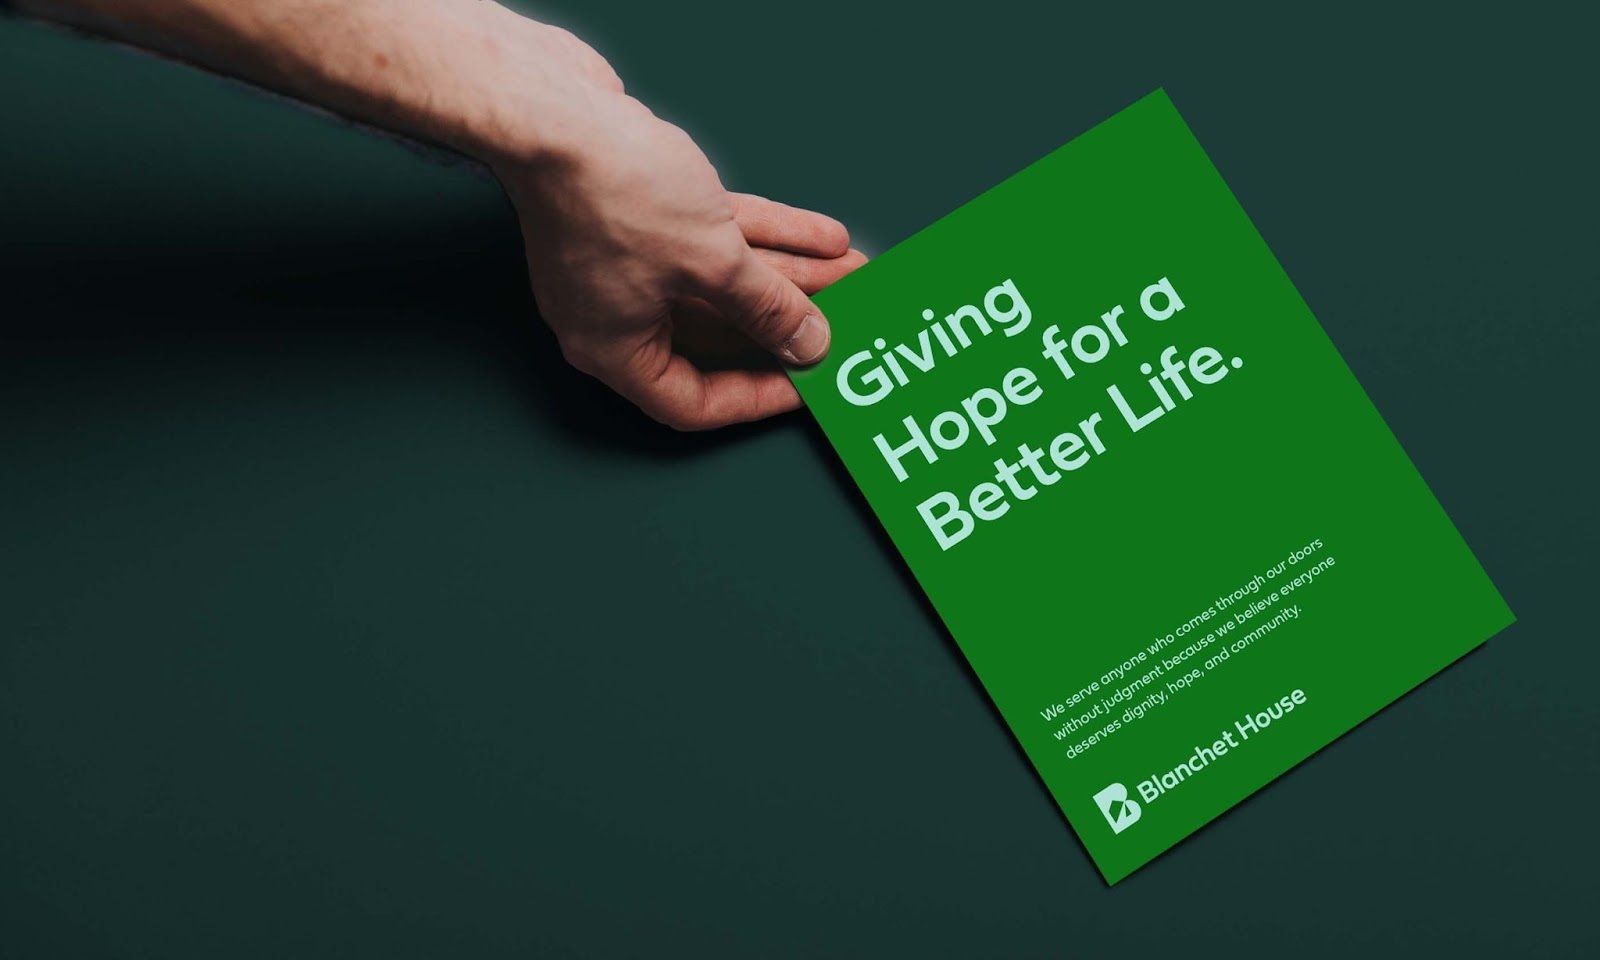 Hand holding booklet reading Giving Hope for a better life. We serve anyone who comes through our doors without judgement because we believe everyone deserves dignity, hope and community.